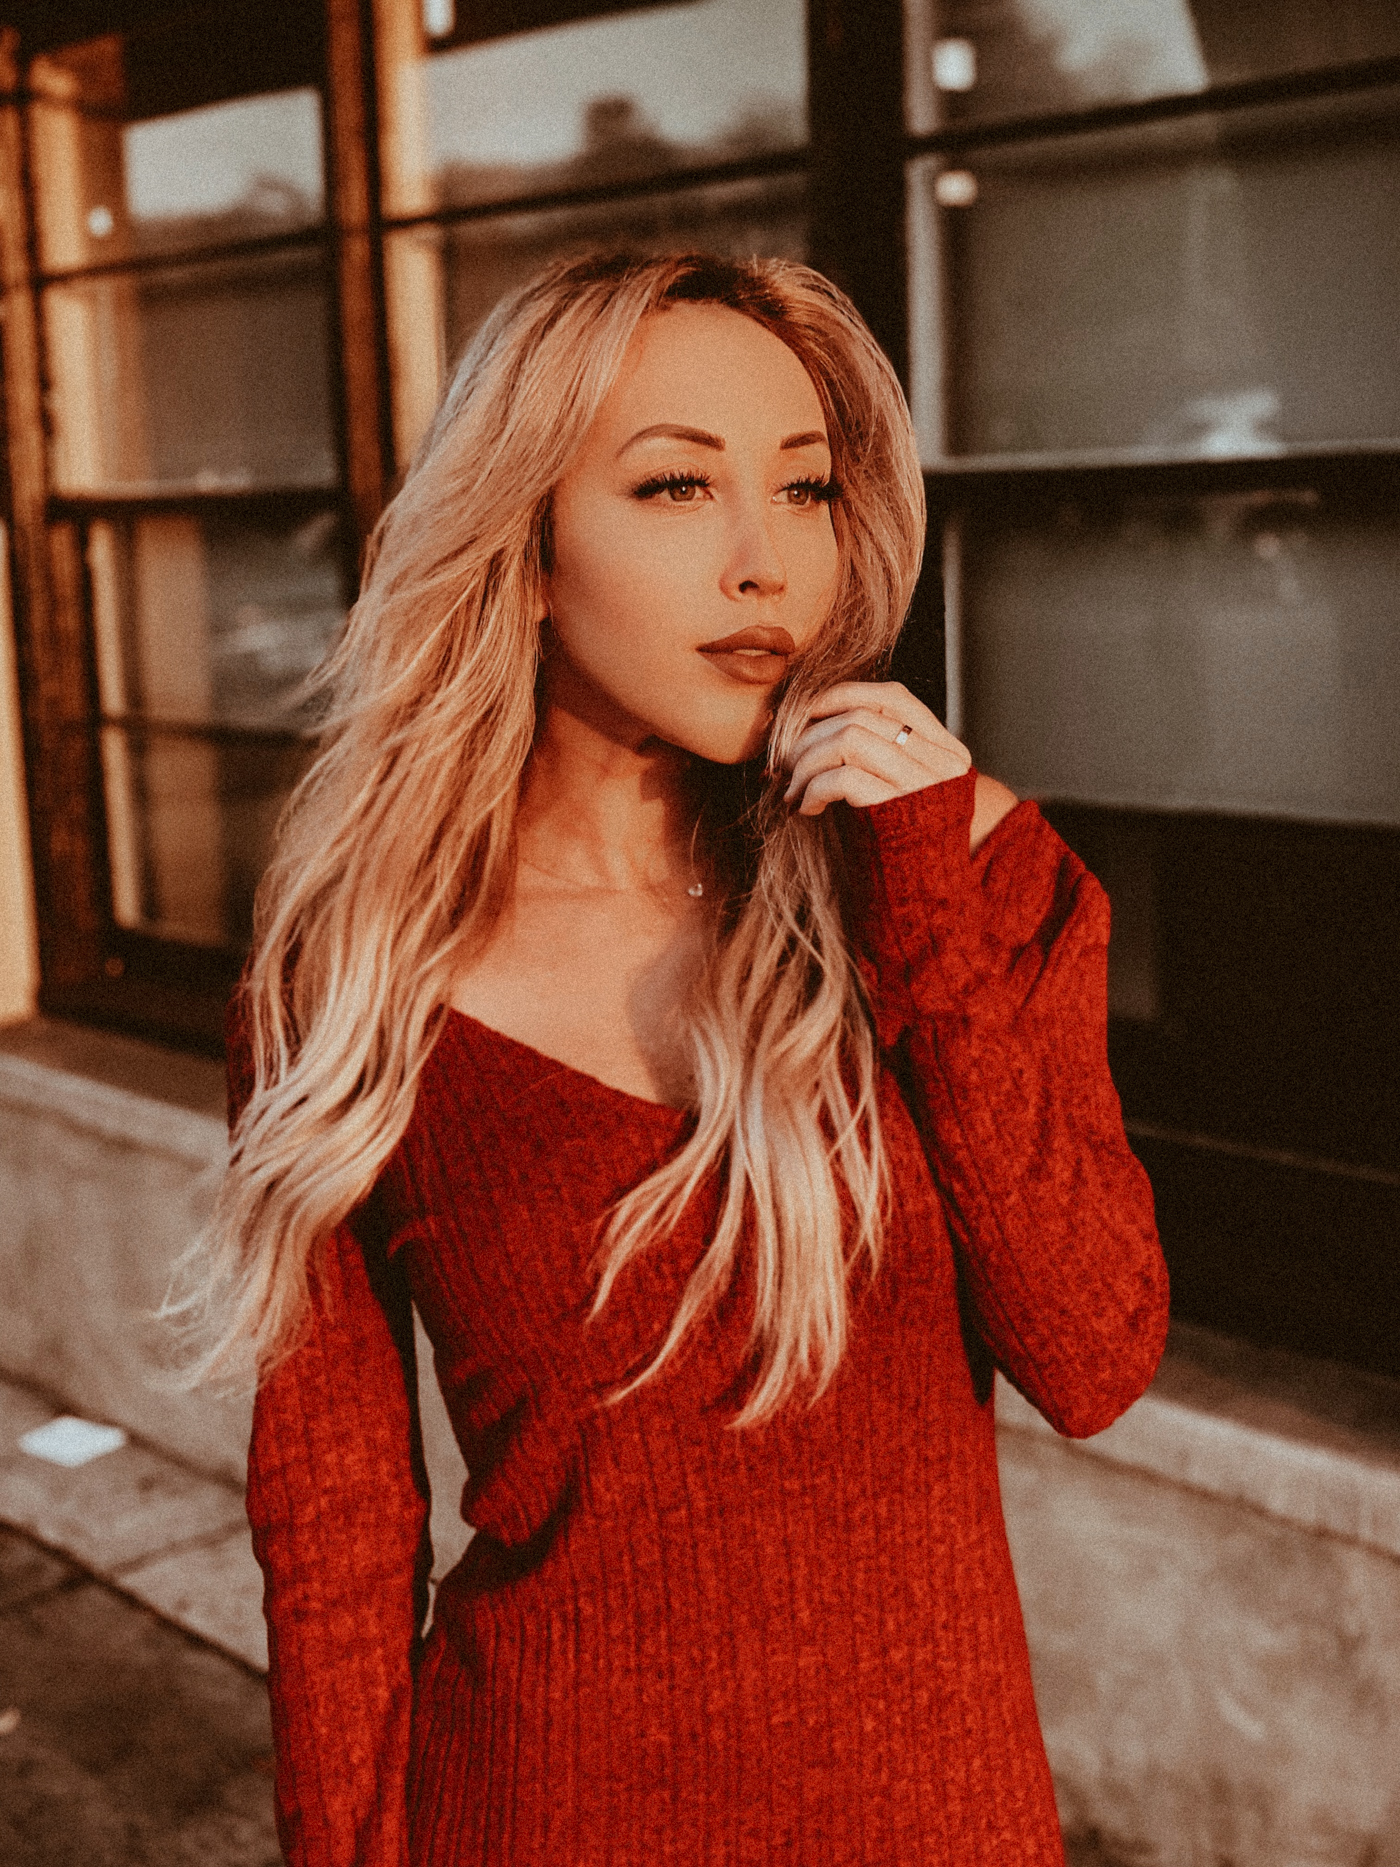 Golden Hour | Shooting at Golden Hour | Sunset | Red Sweater Dress | Blondie in the City by Hayley Larue